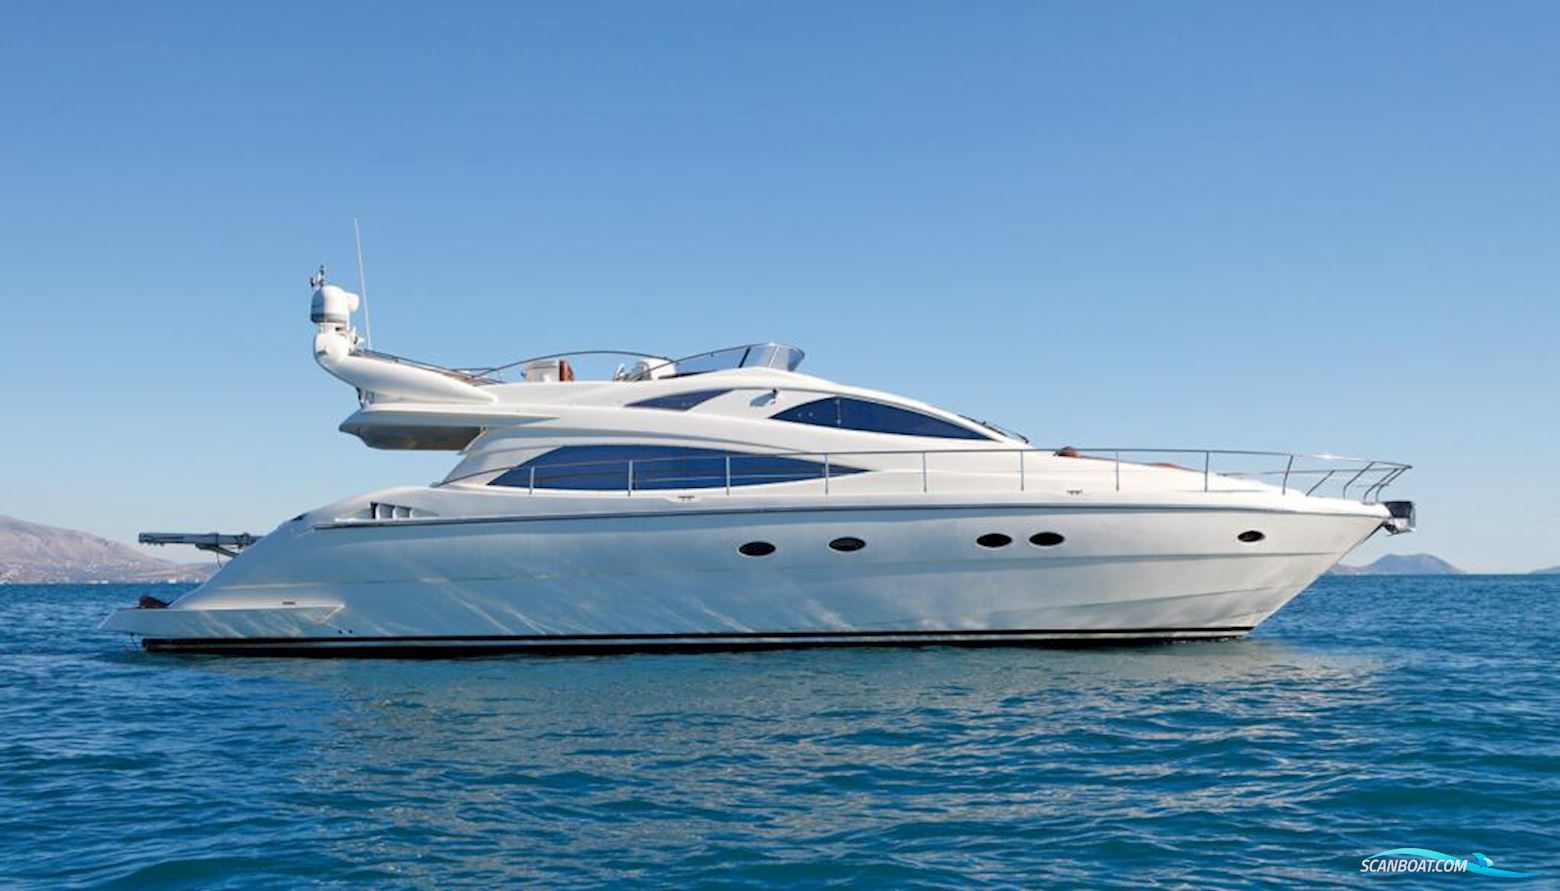 Aicon Yachts 56 Motor boat 2003, with Man D 2848 LE 403 engine, Italy